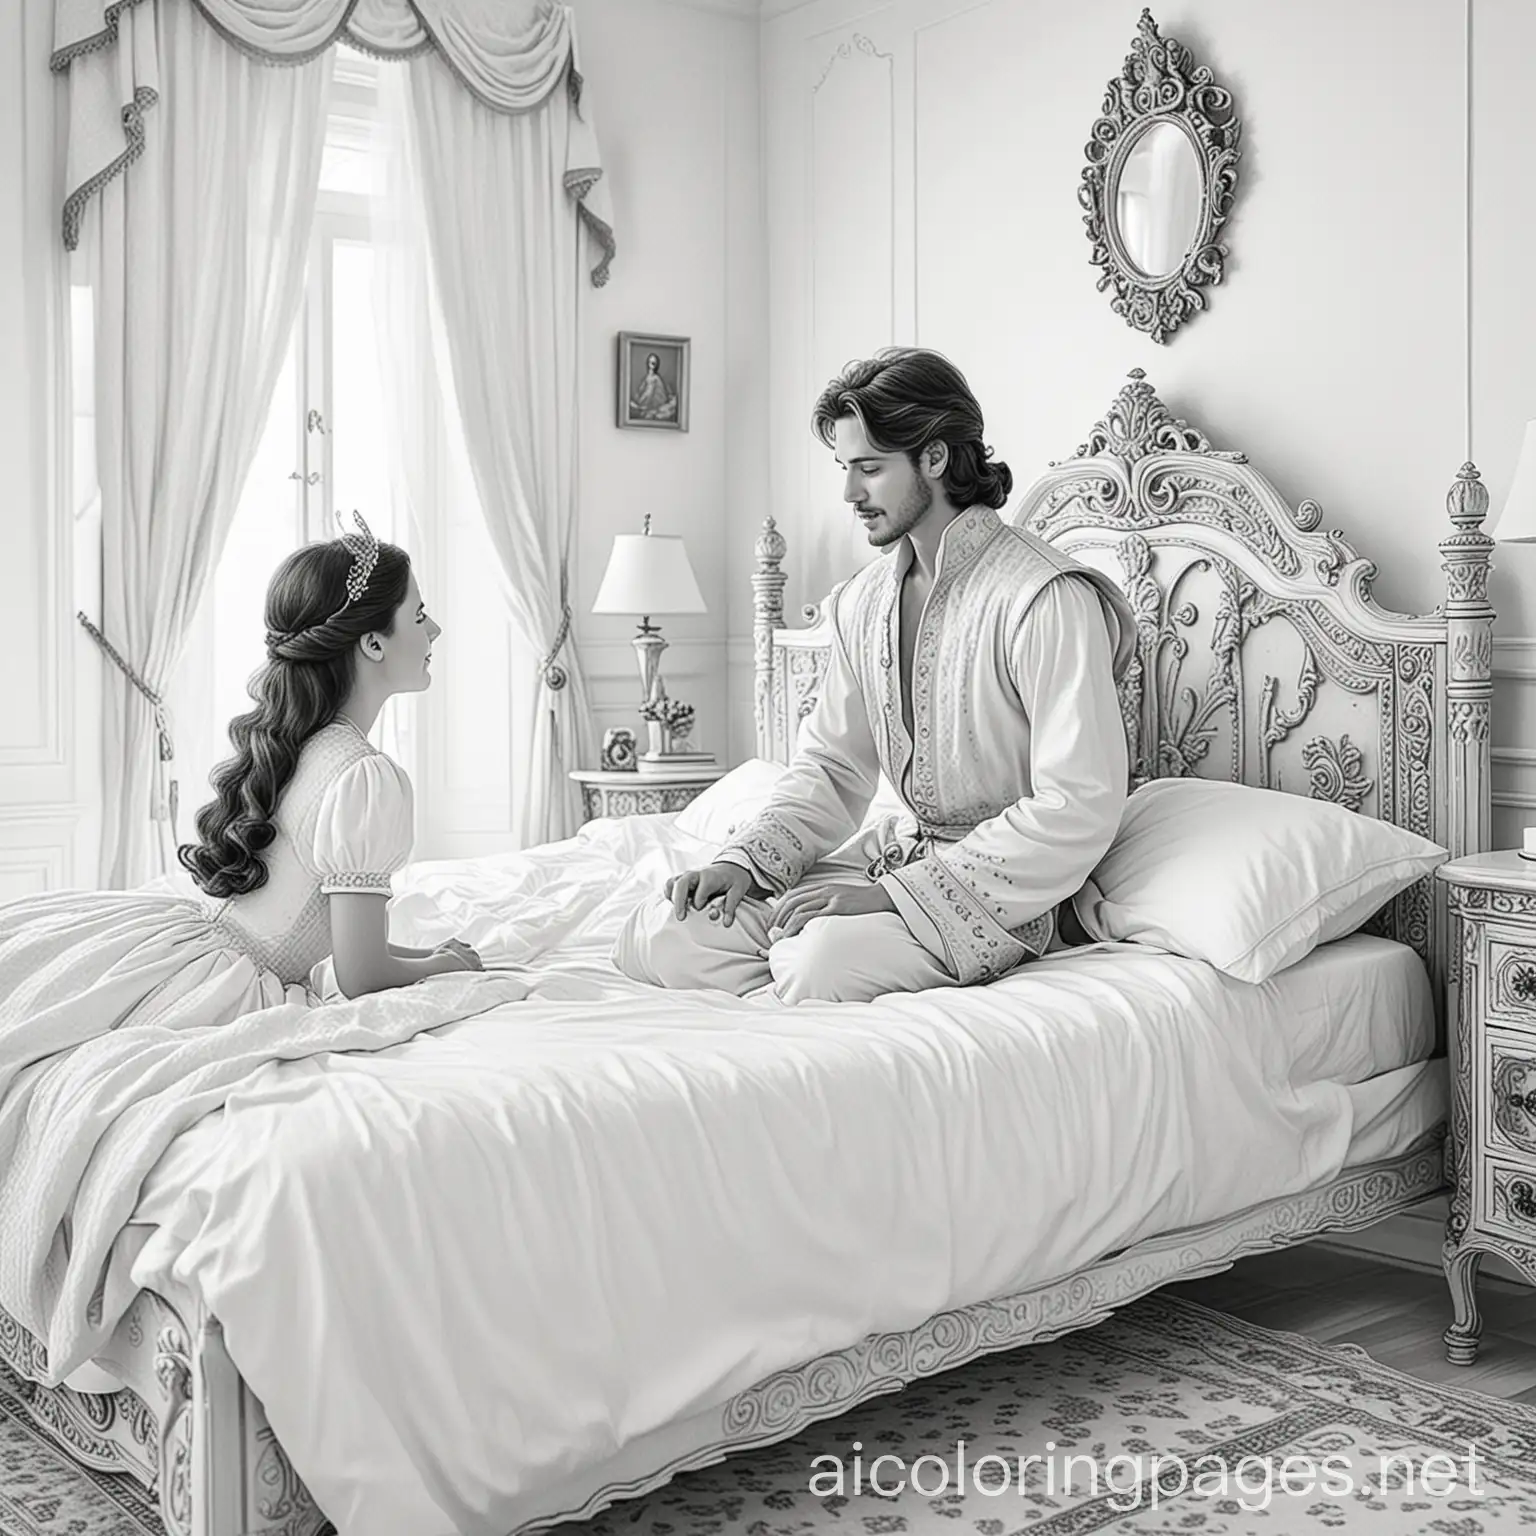  young prince talking to princess in her bed room.
, Coloring Page, black and white, line art, white background, Simplicity, Ample White Space. The background of the coloring page is plain white to make it easy for young children to color within the lines. The outlines of all the subjects are easy to distinguish, making it simple for kids to color without too much difficulty